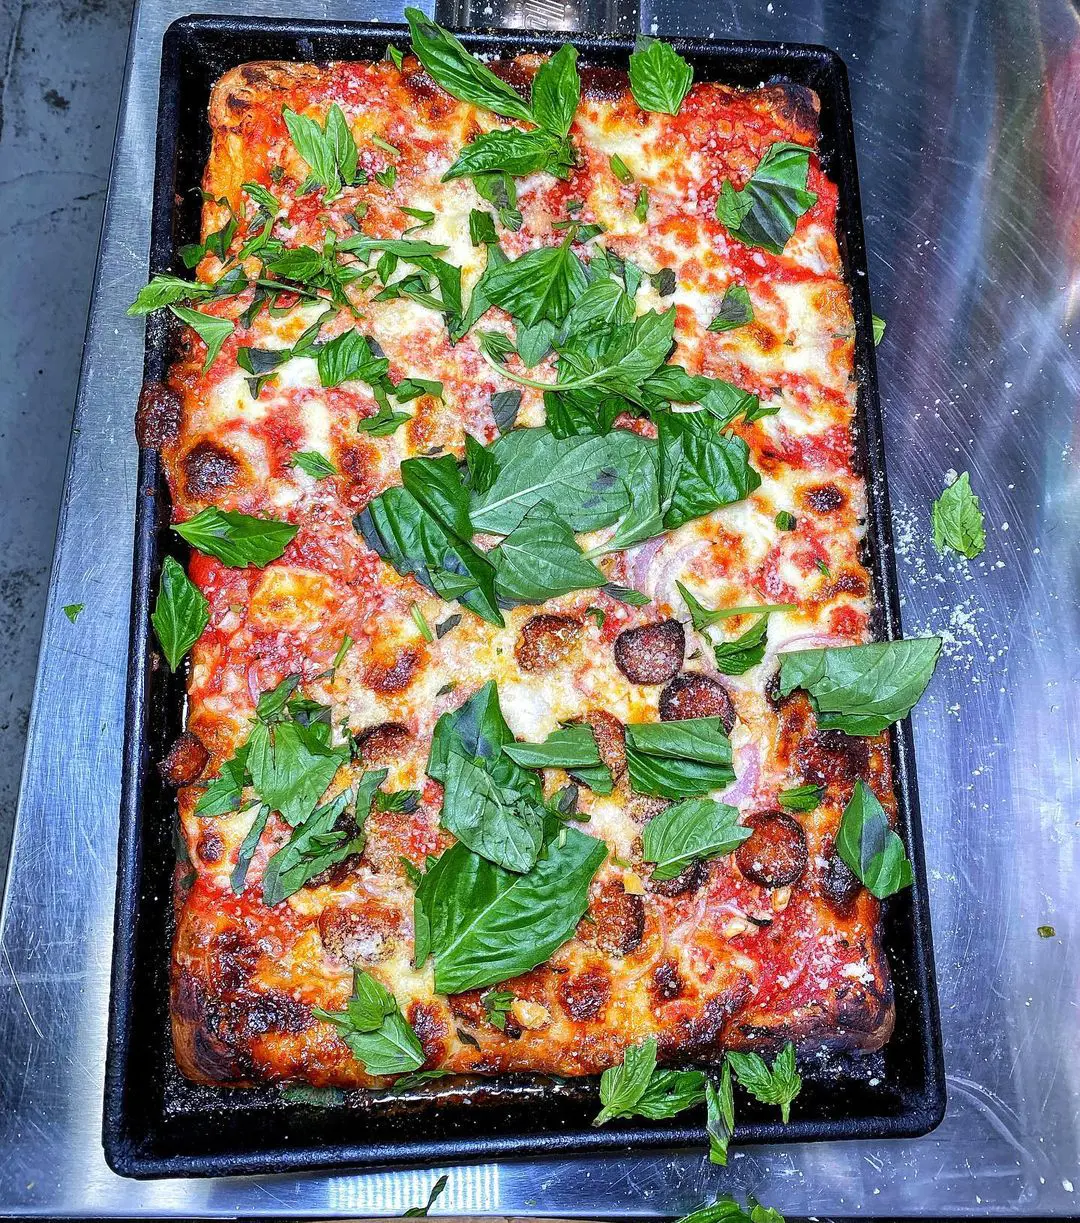 A square pie garnished with herbs from Di Fara Pizza photographed by @mikenyc10